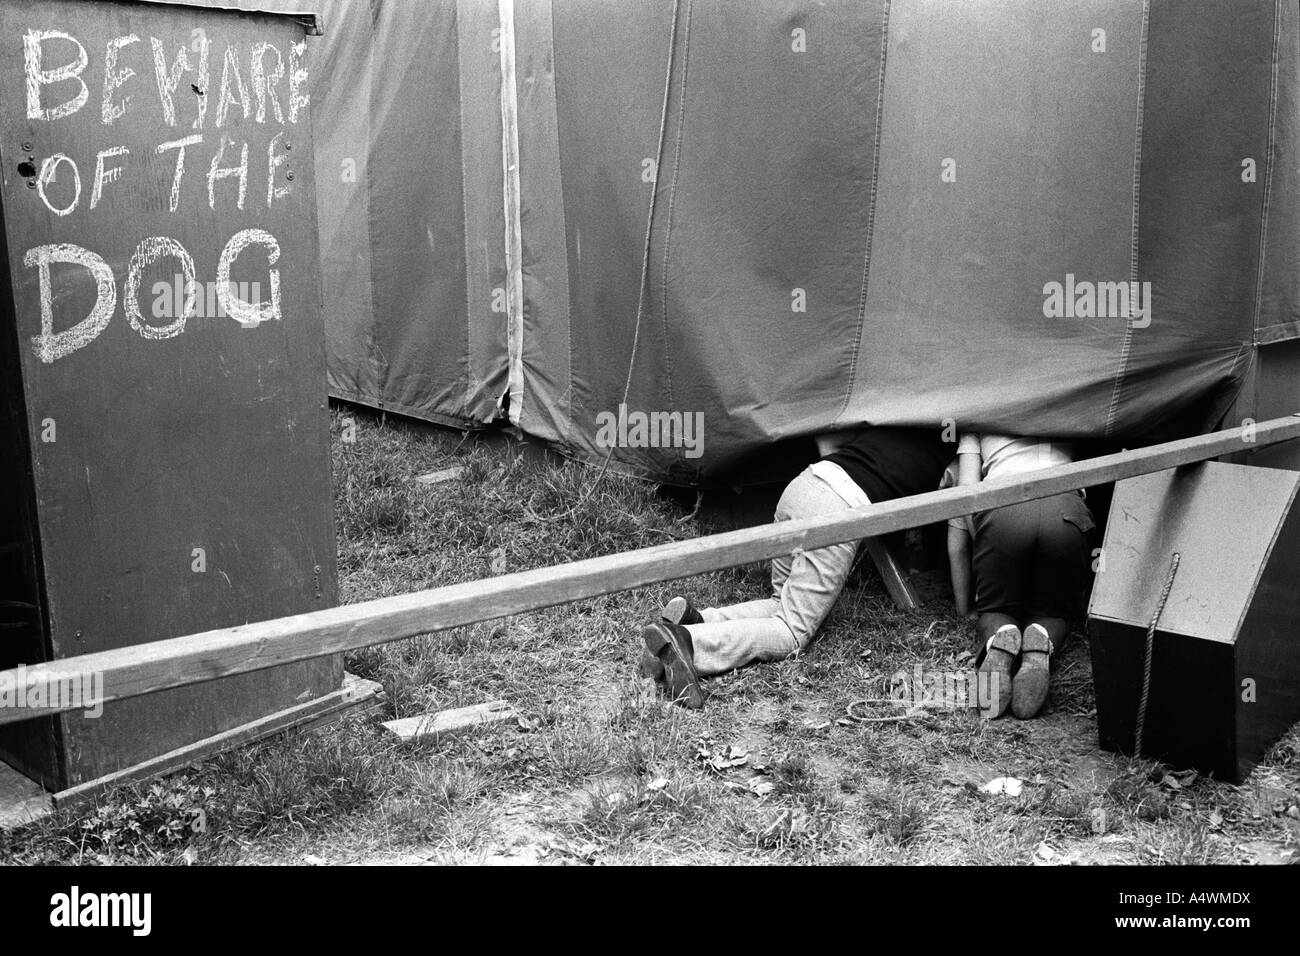 Beware of the dog sign. Derby Day Fair. Epsom Downs, Surrey  England 1971 1970s UK HOMER SYKES Stock Photo